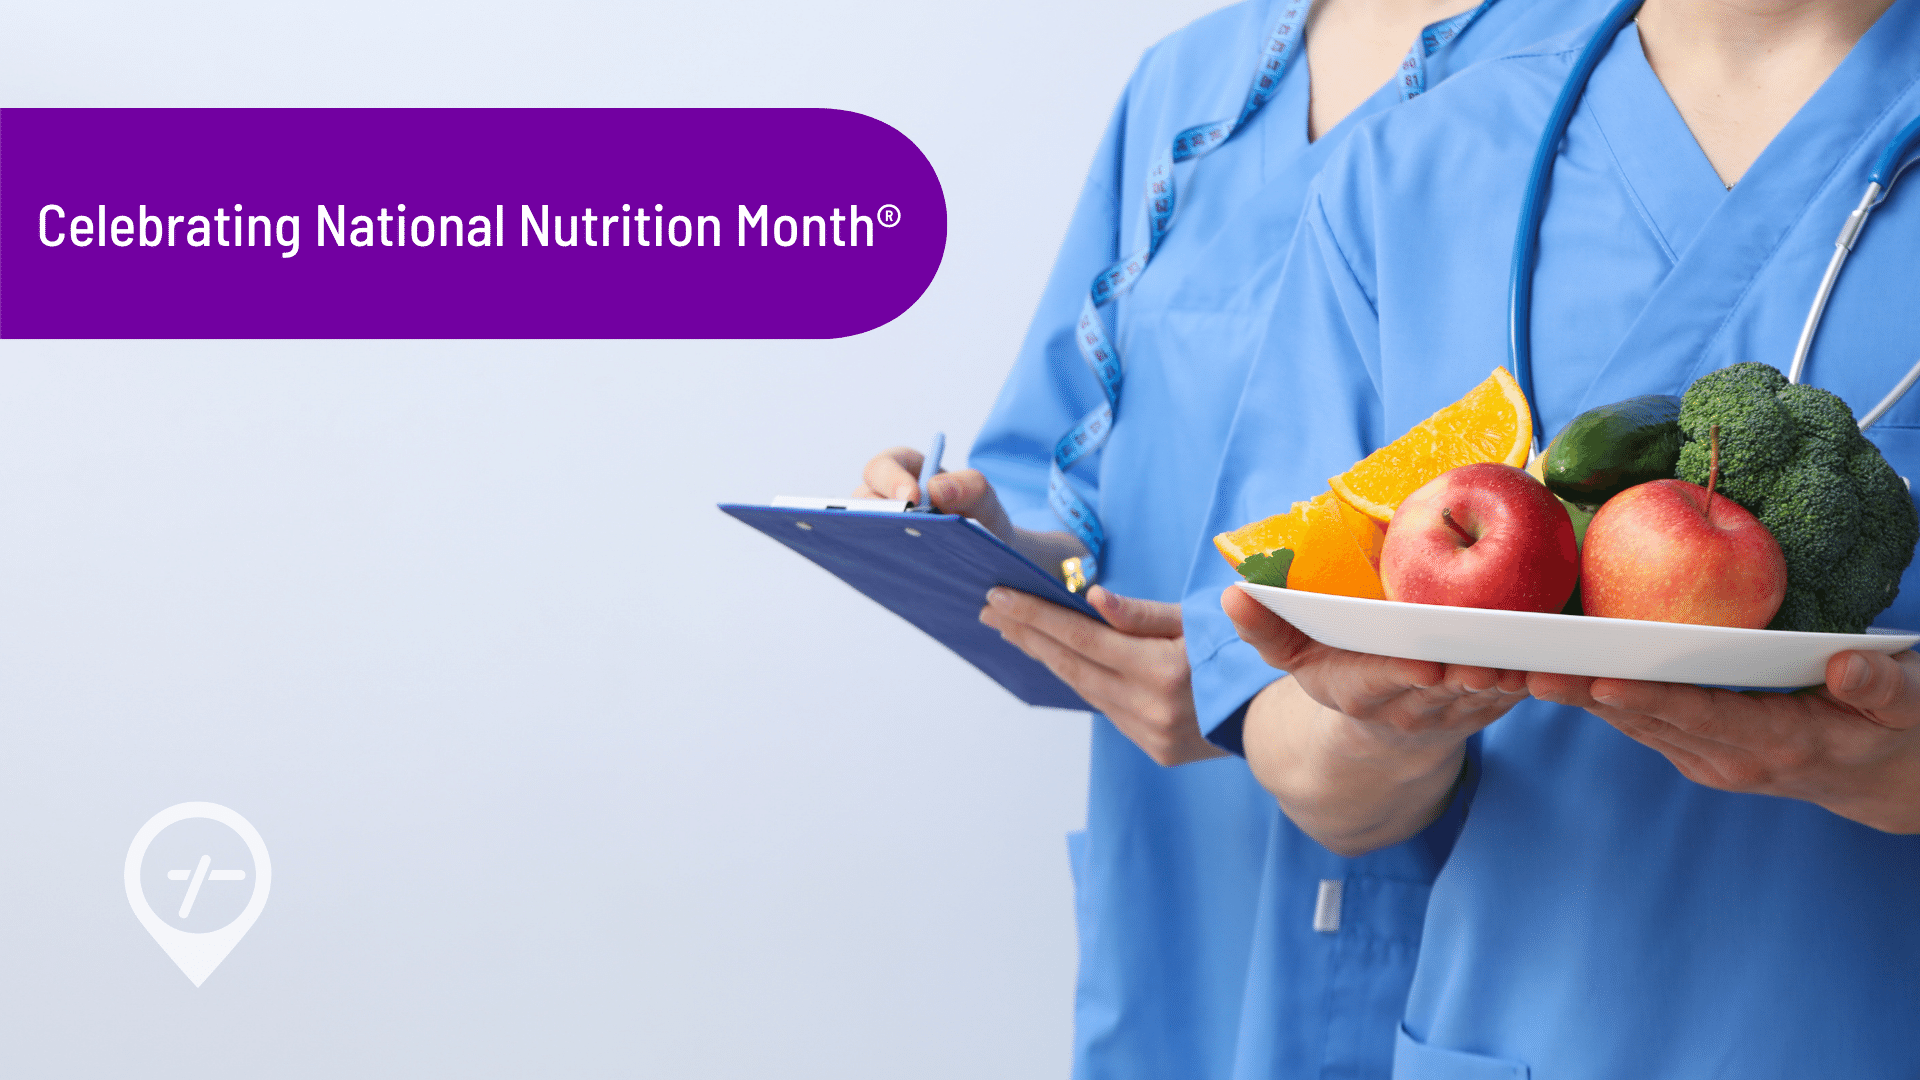 A nurse holds a plate of fruits and vegetables while another holds a clipboard in celebration of National Nutrition Month.